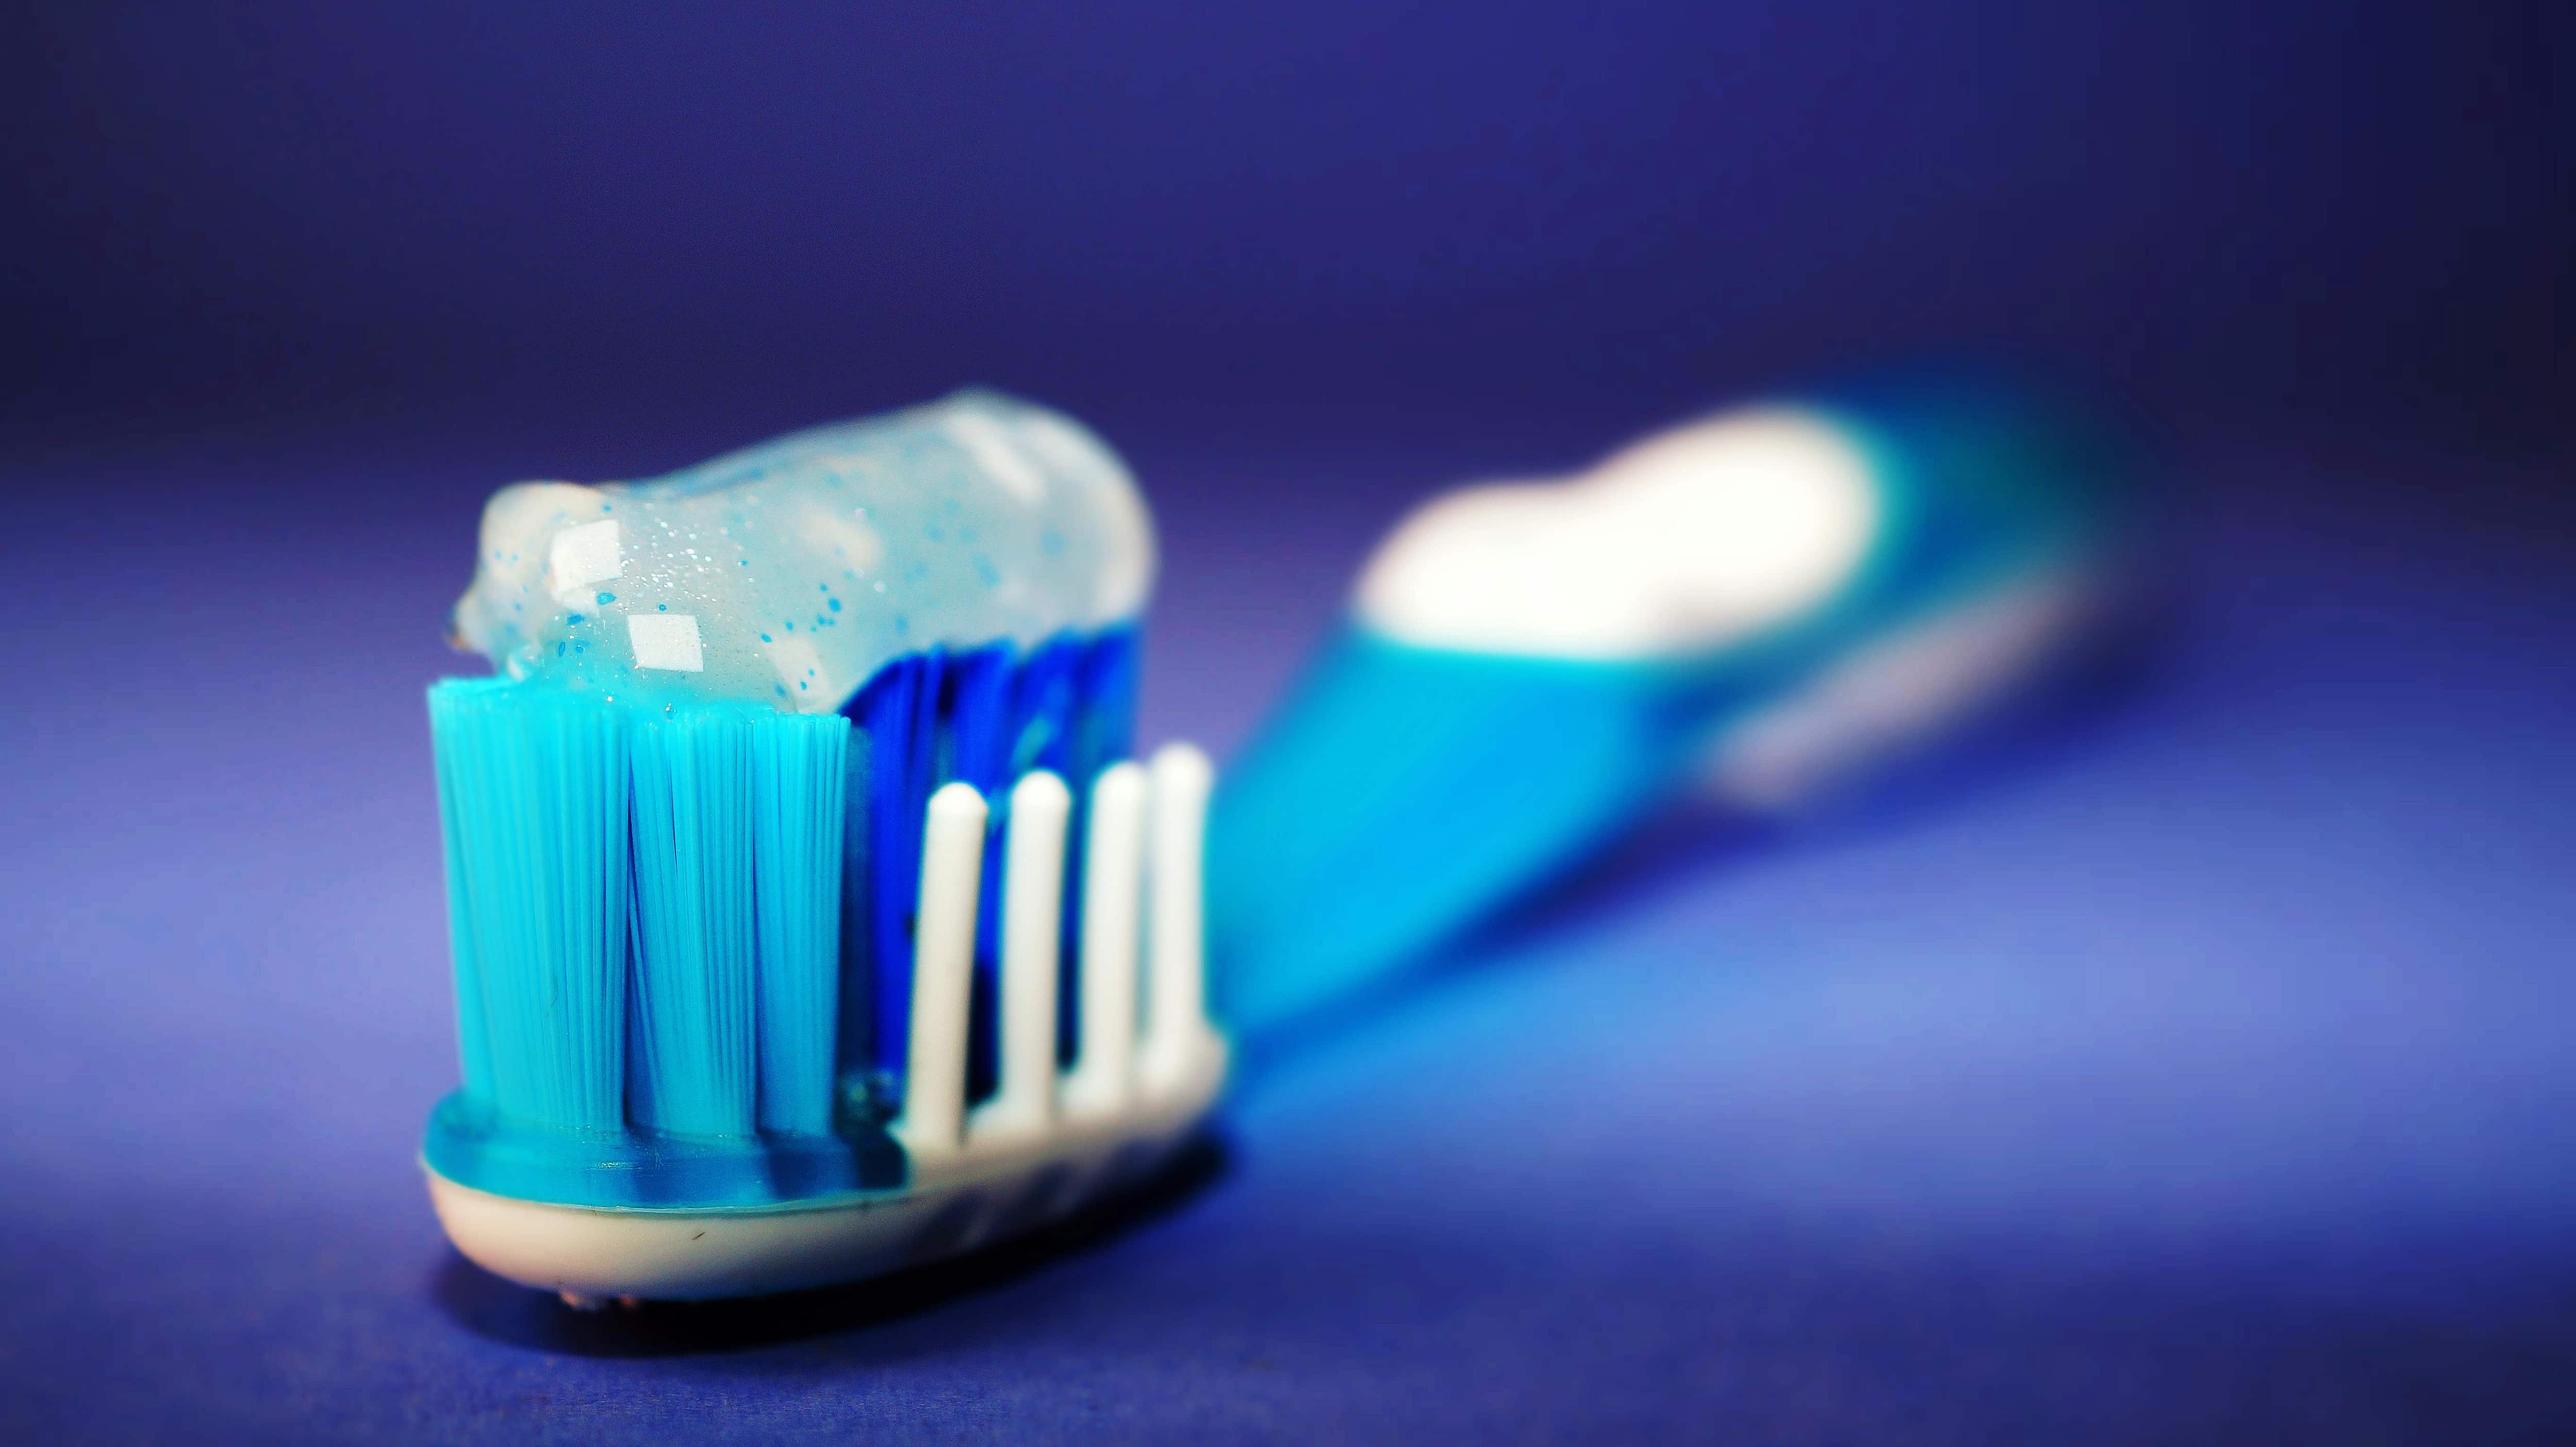 Colgate-Palmolive India stages strong Q4 show led by double-digit growth in toothpaste 